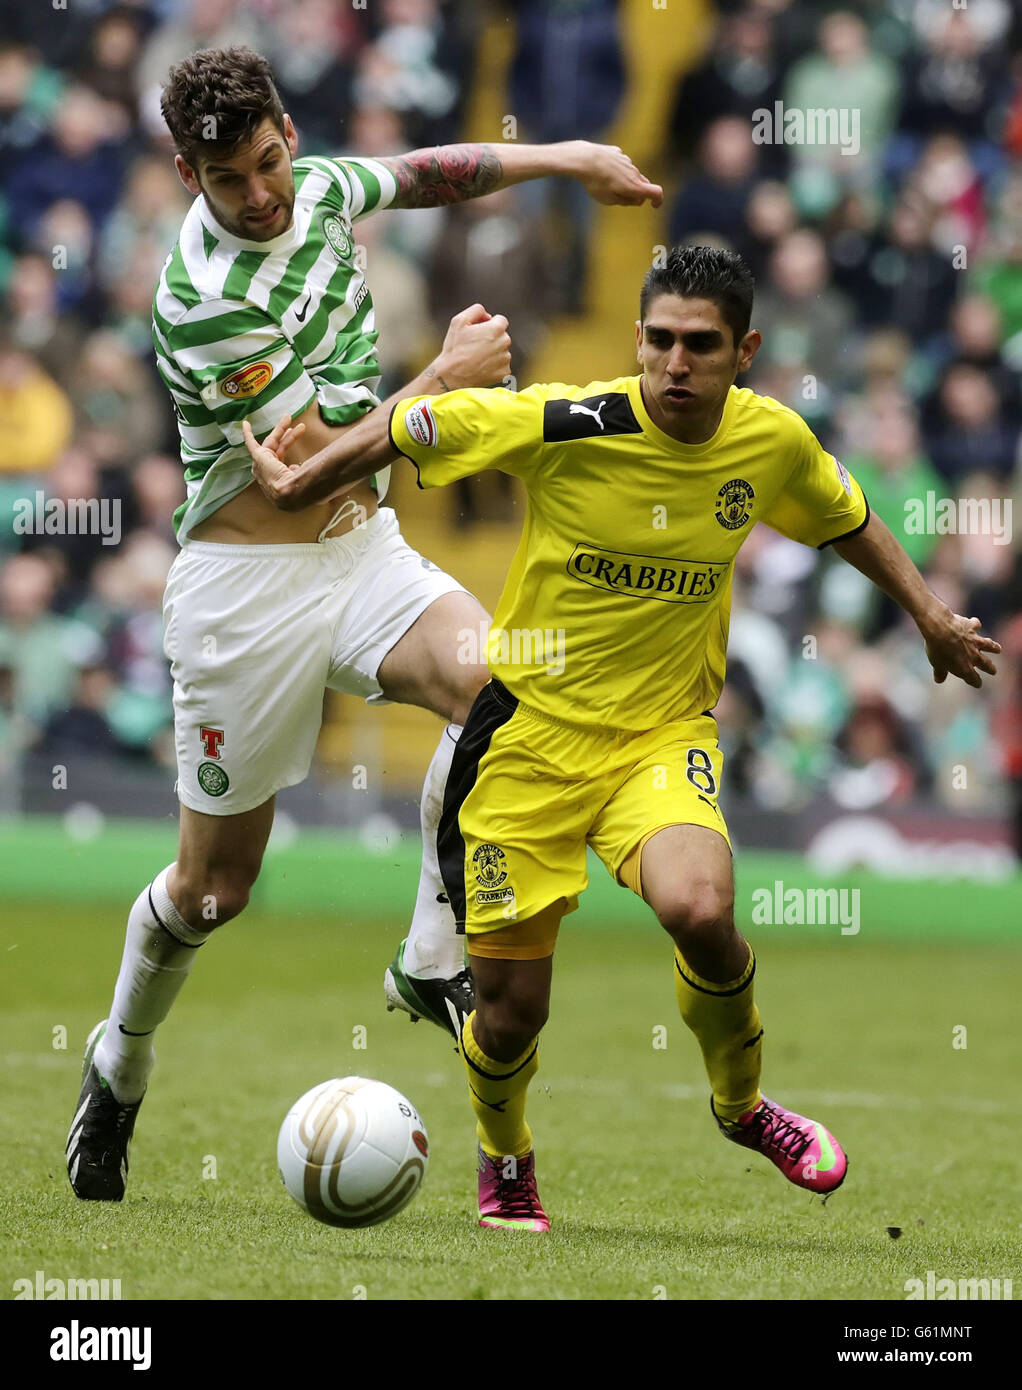 Celtic's Charlie Mulgrew and Hibernian's Jorge Claros fight for the ball during the Clydesdale Bank Scottish Premier League match at Celtic Park, Glasgow. Stock Photo